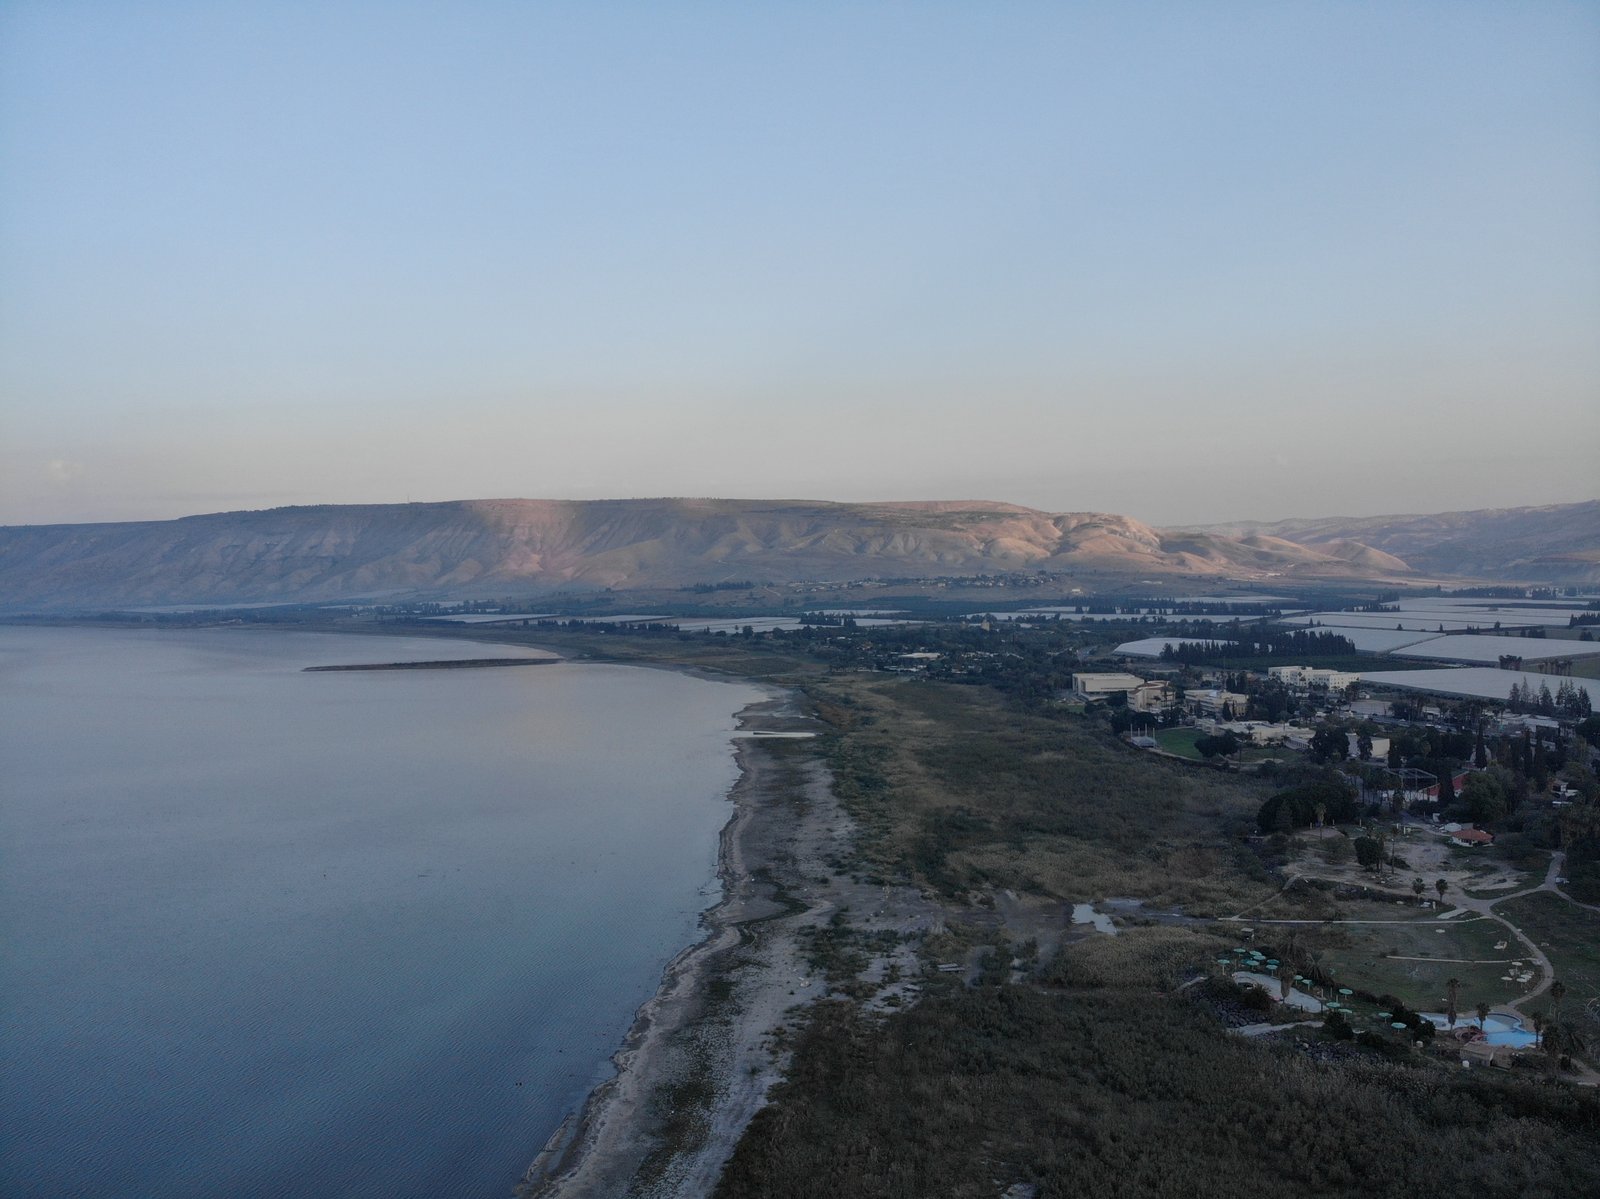 Sea of Galilee and Golan Hills